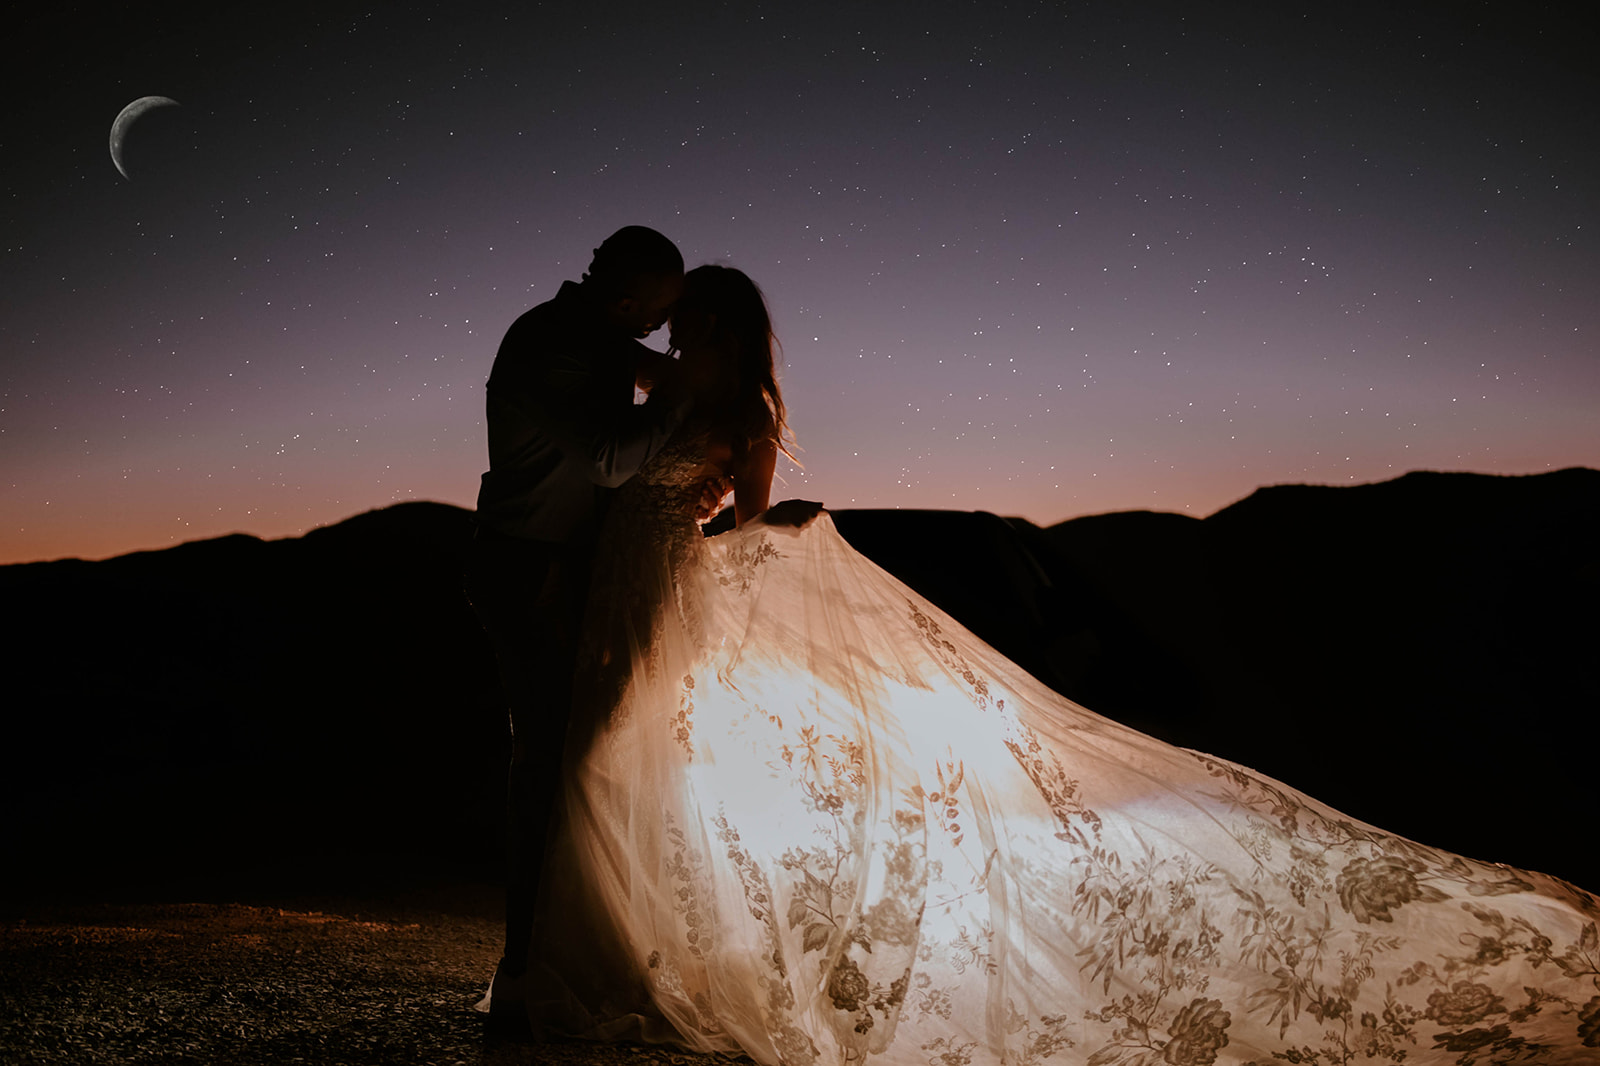 A bride and groom standing face to face silhouetted under the moon and stars night sky with her dress lit up